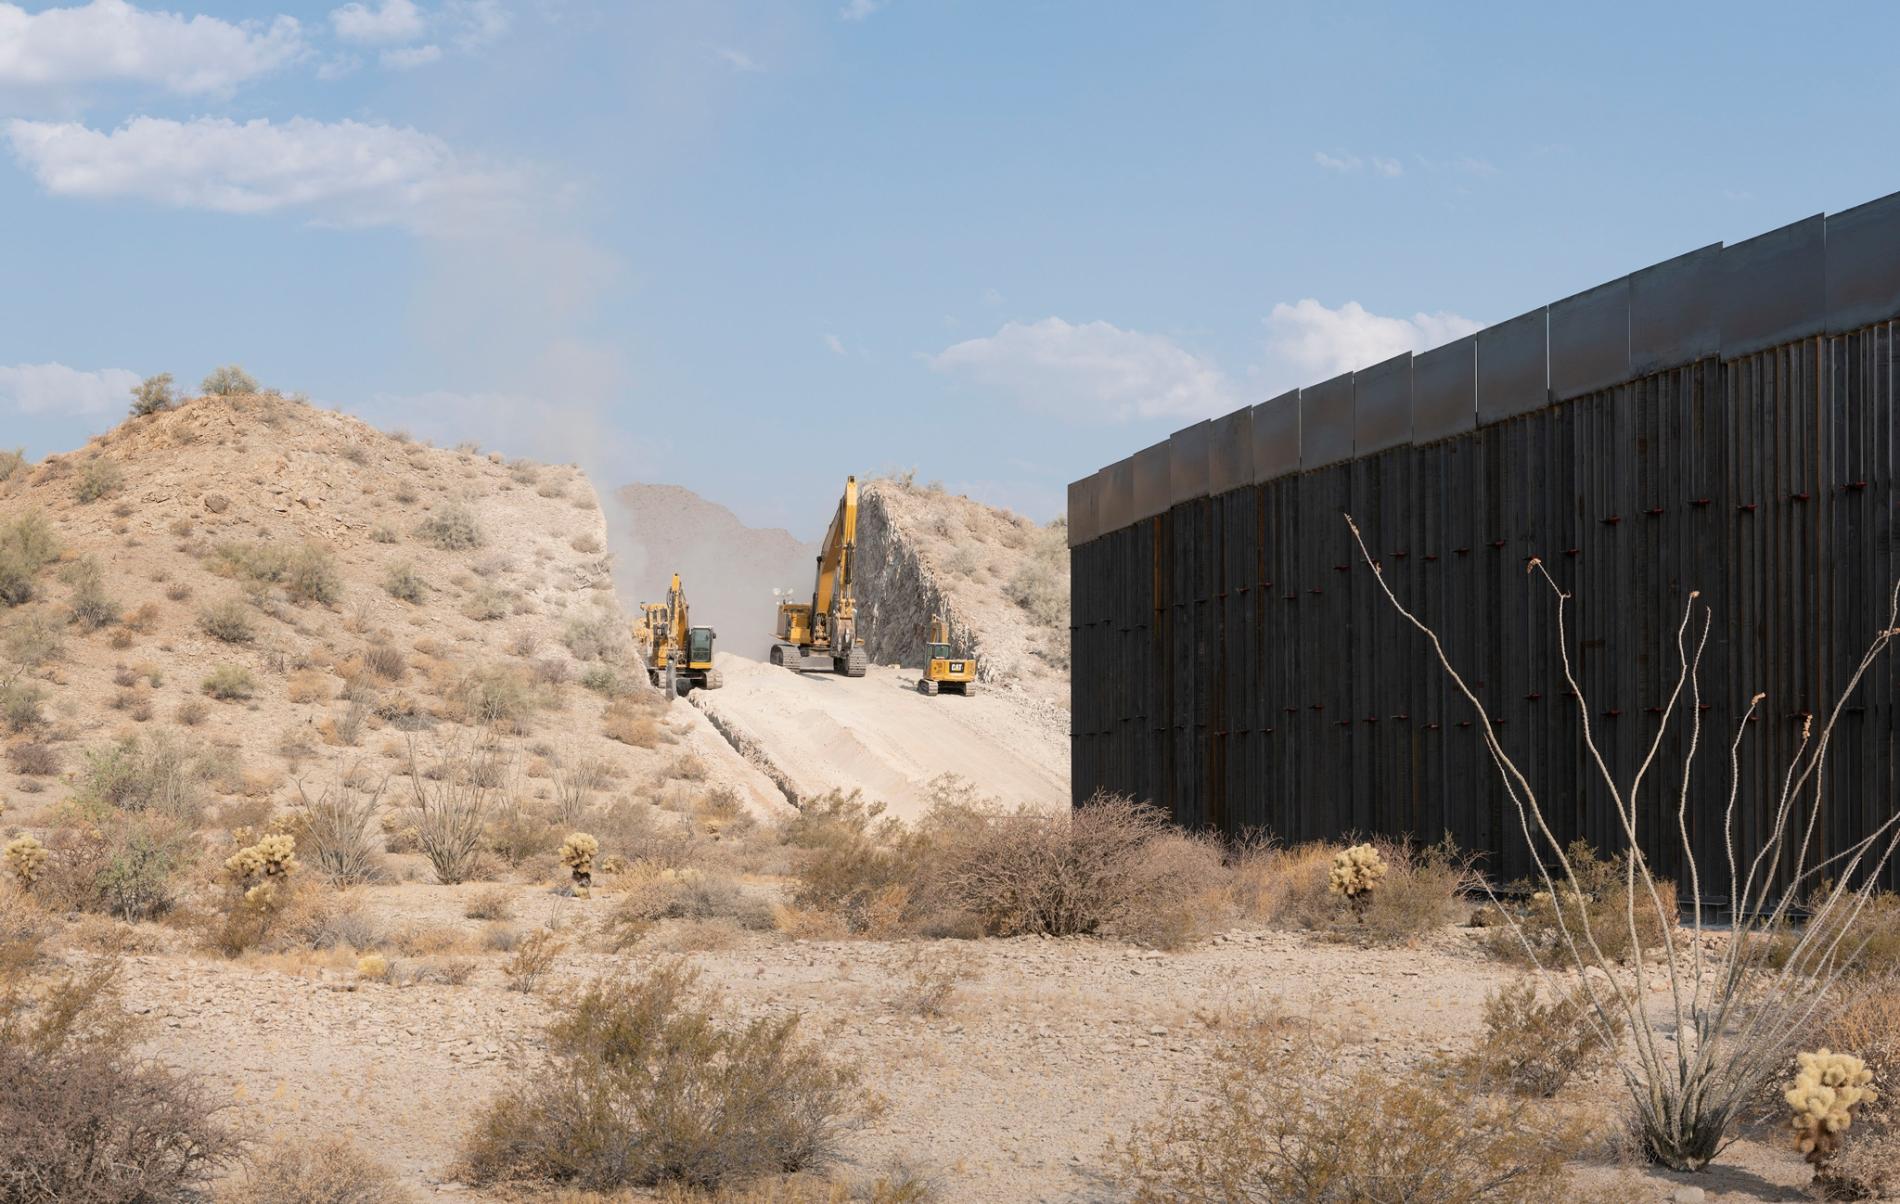 Terminating border-wall contracts would cost billions